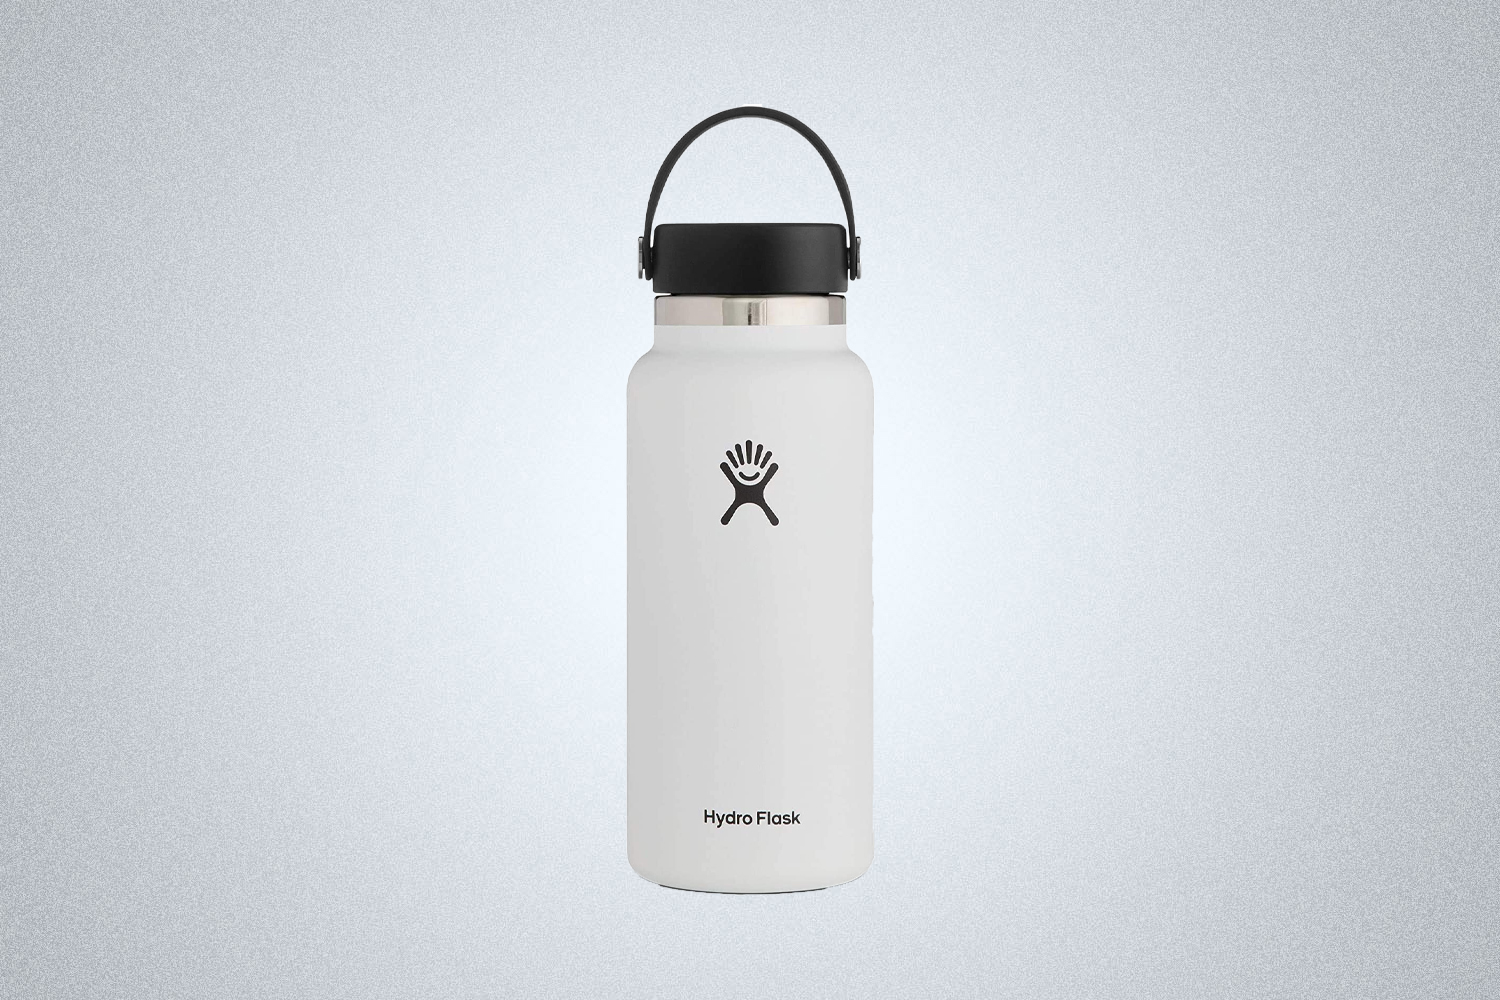 The Hydro Flask Water Bottle is perfect for winter car emergencies when water is important